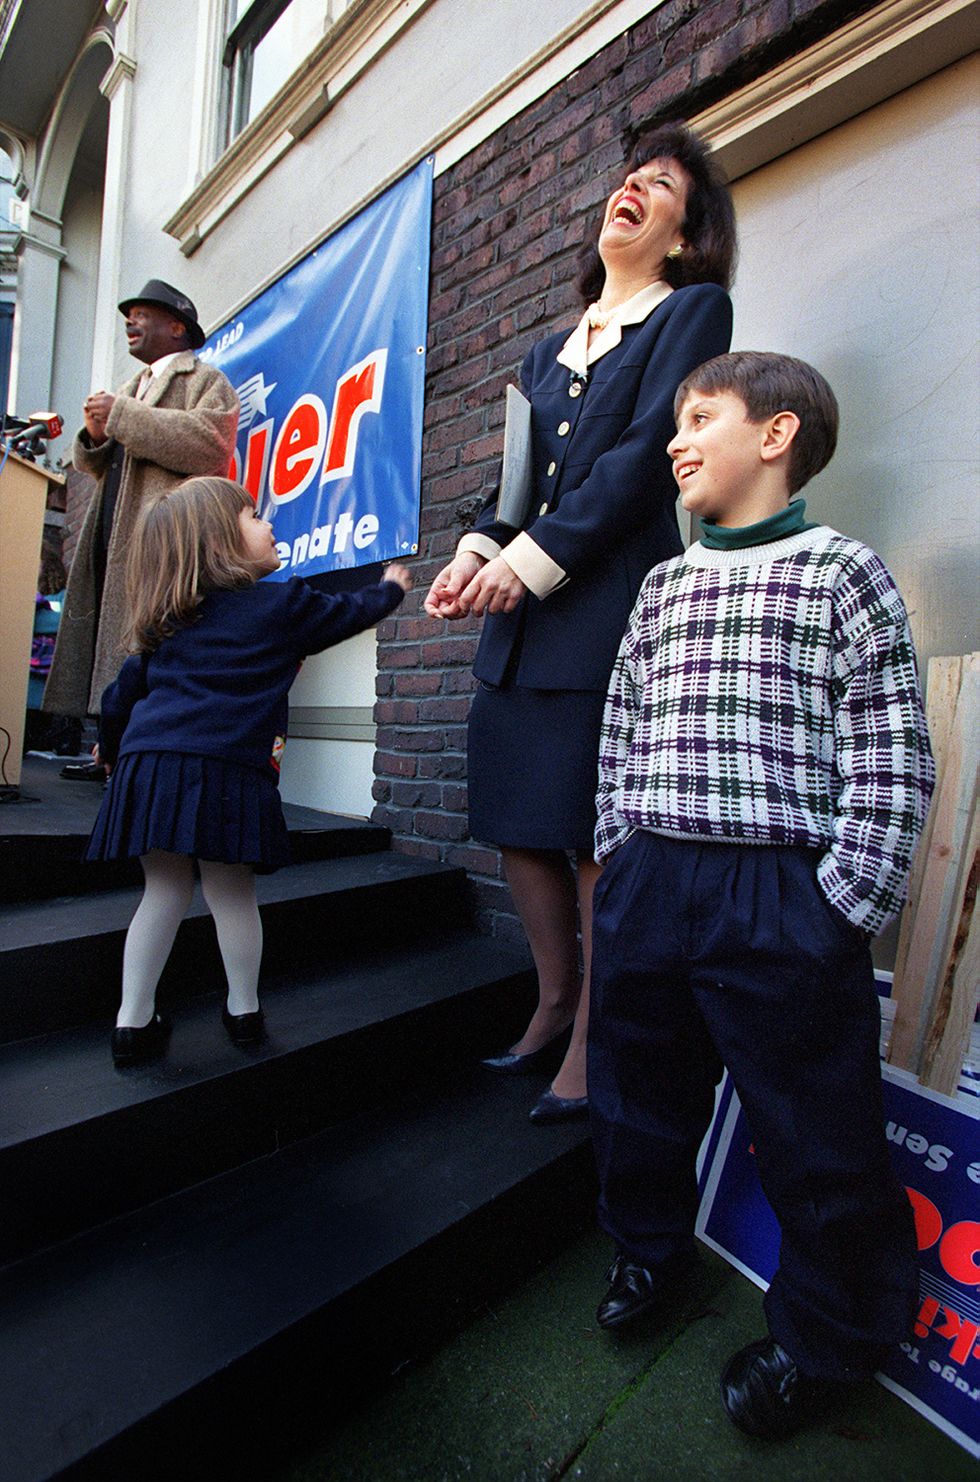 jackie speier laughing with her head tilted back with her children on either side of her